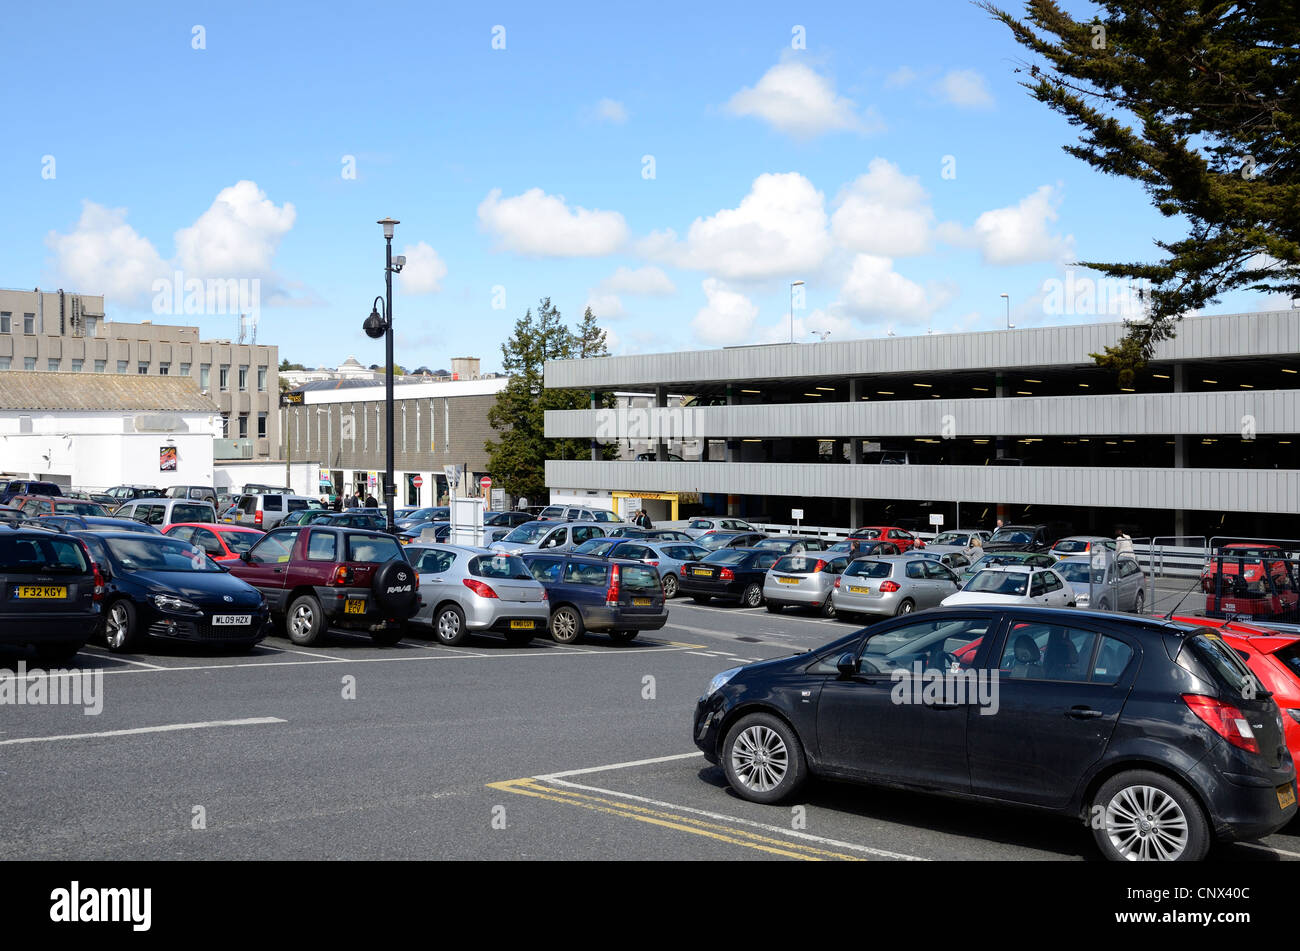 A council owned municipal car park in Truro, Cornwall, UK Stock Photo